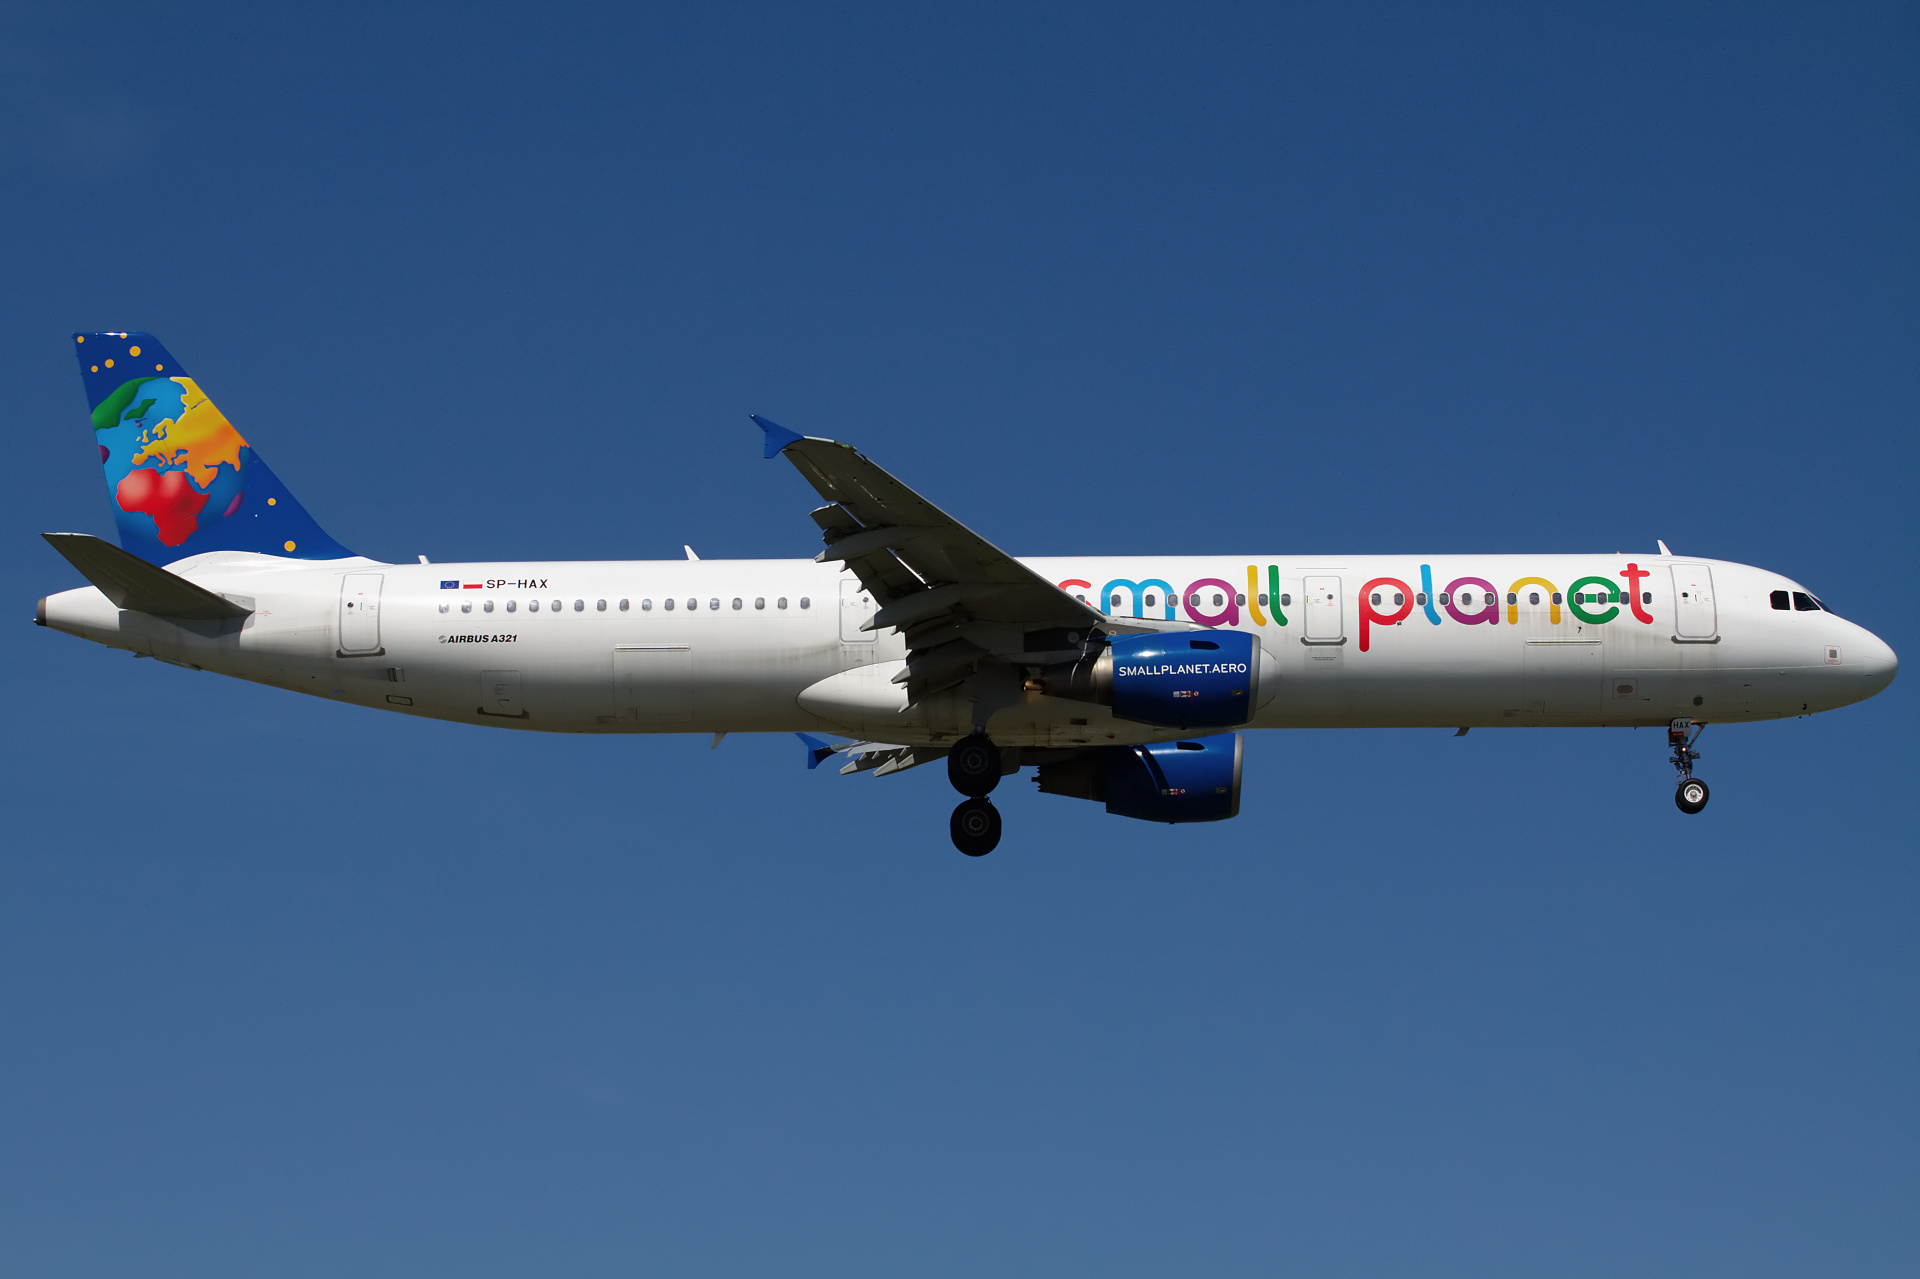 SP-HAX (Aircraft » EPWA Spotting » Airbus A321-200 » Small Planet Airlines Polska)